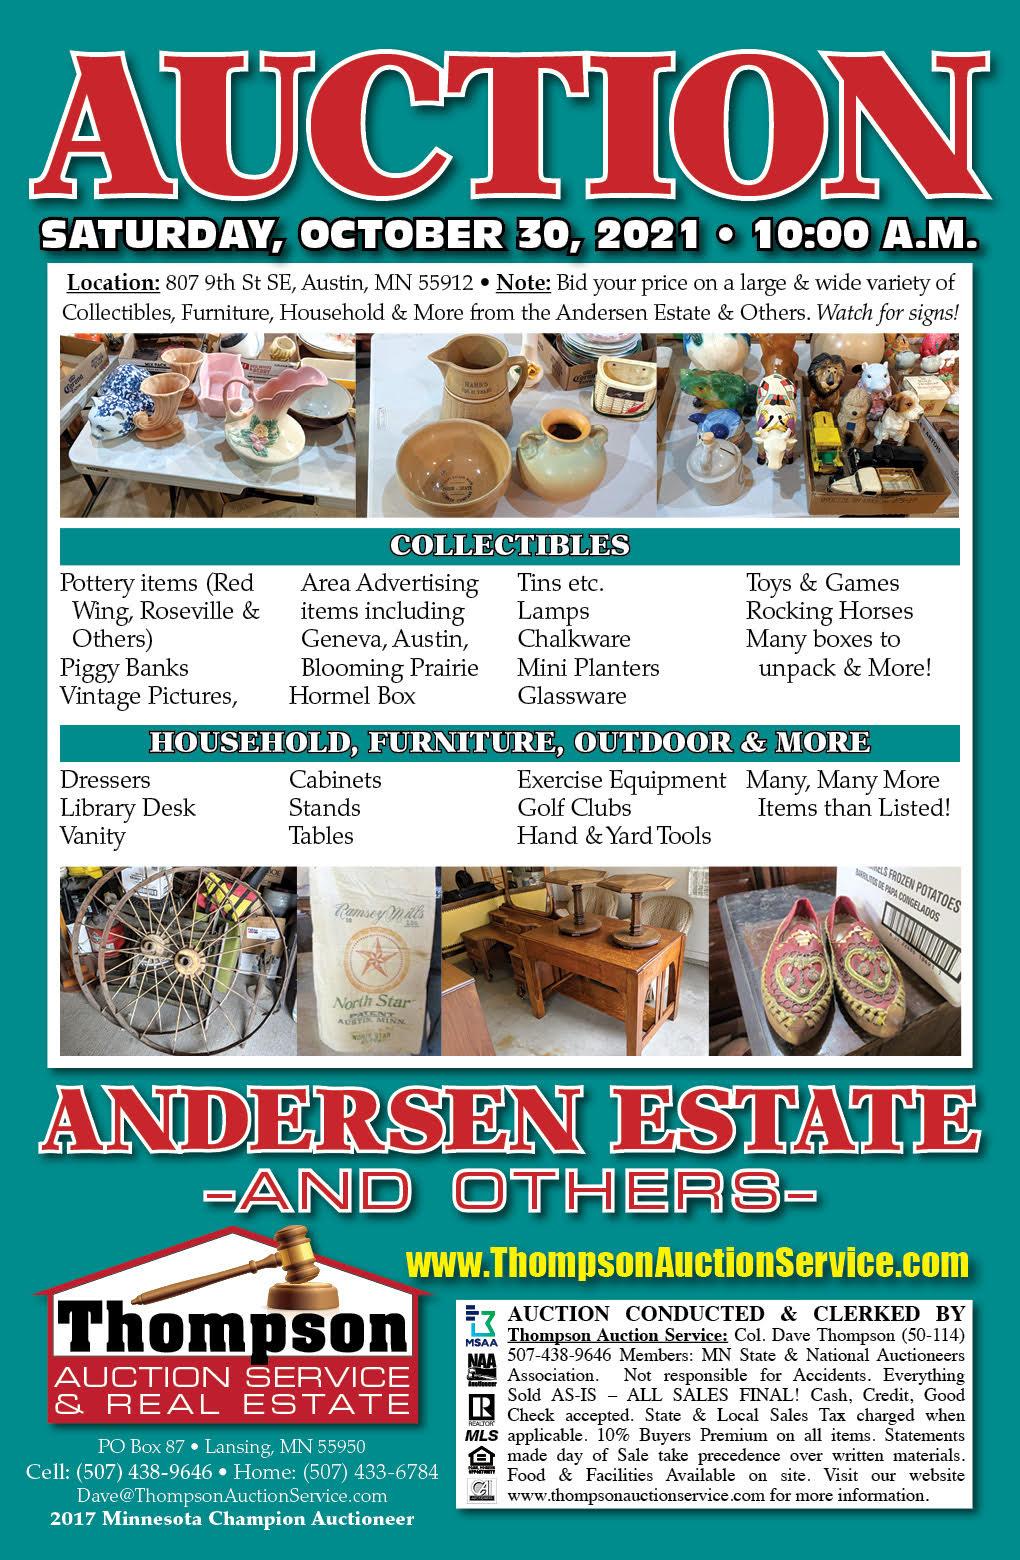 Andersen Estate & Others Live Onsite Auction